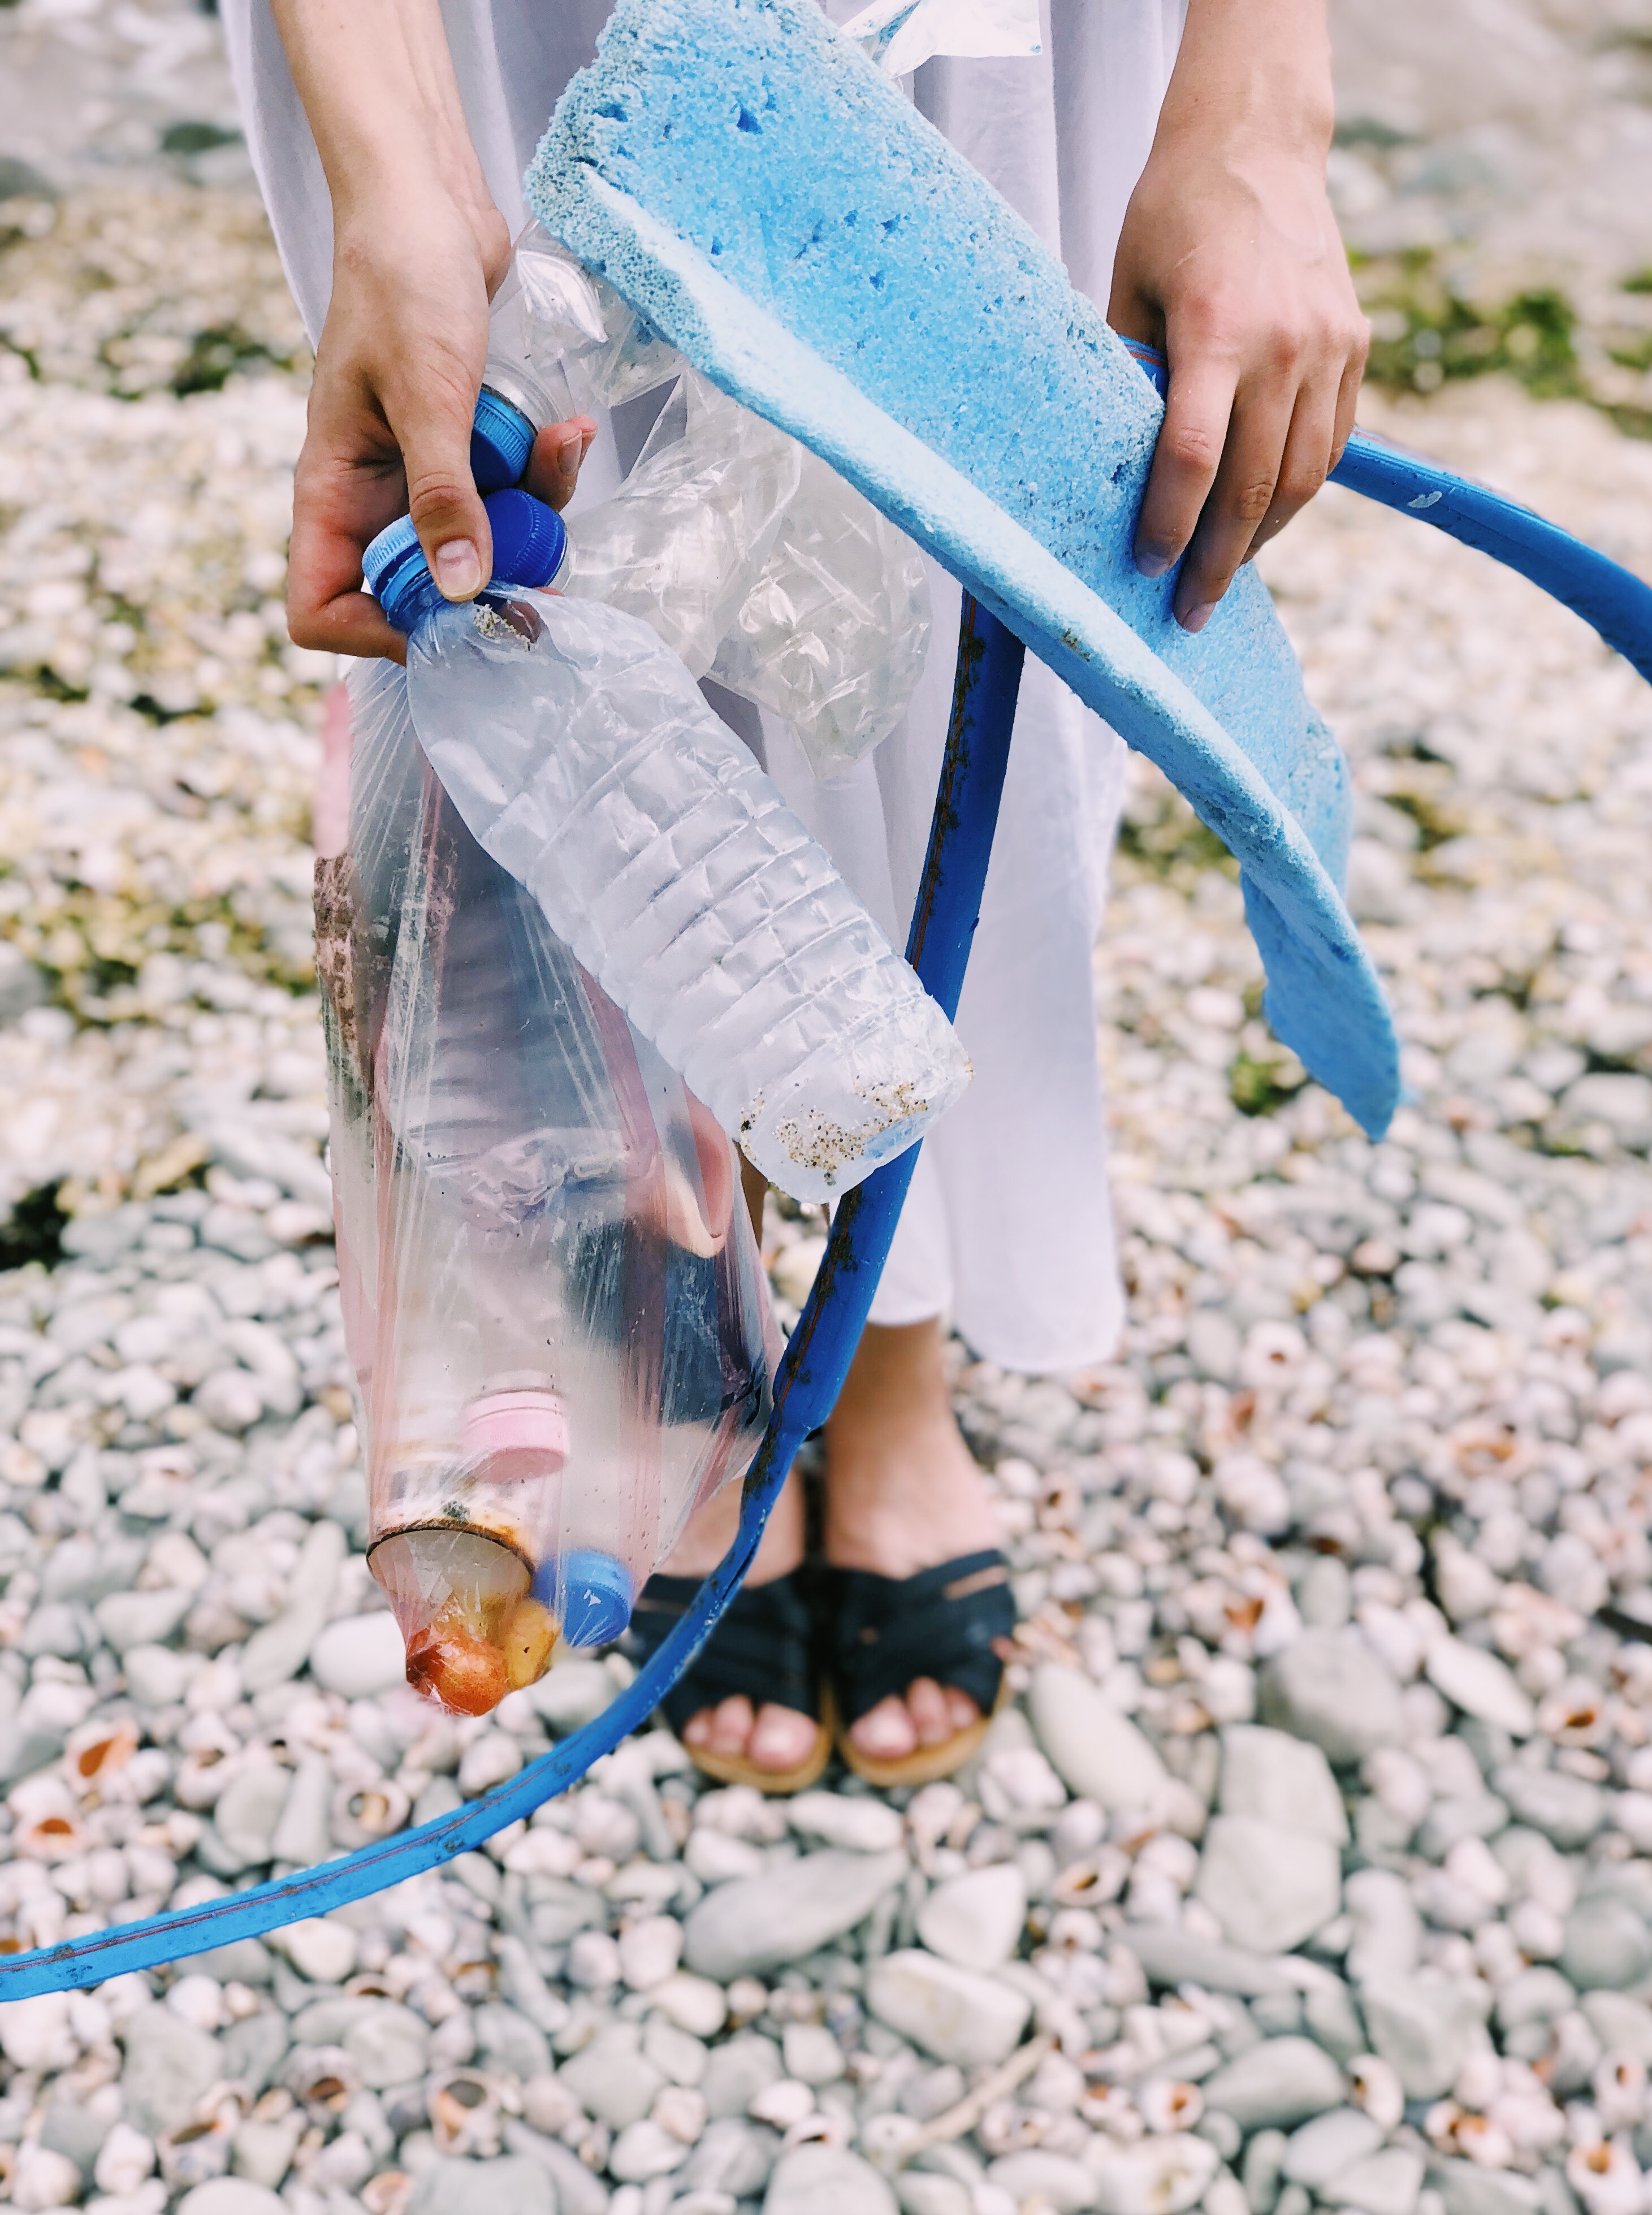 person-holding-plastic-bottles-and-hose-1201589.jpg